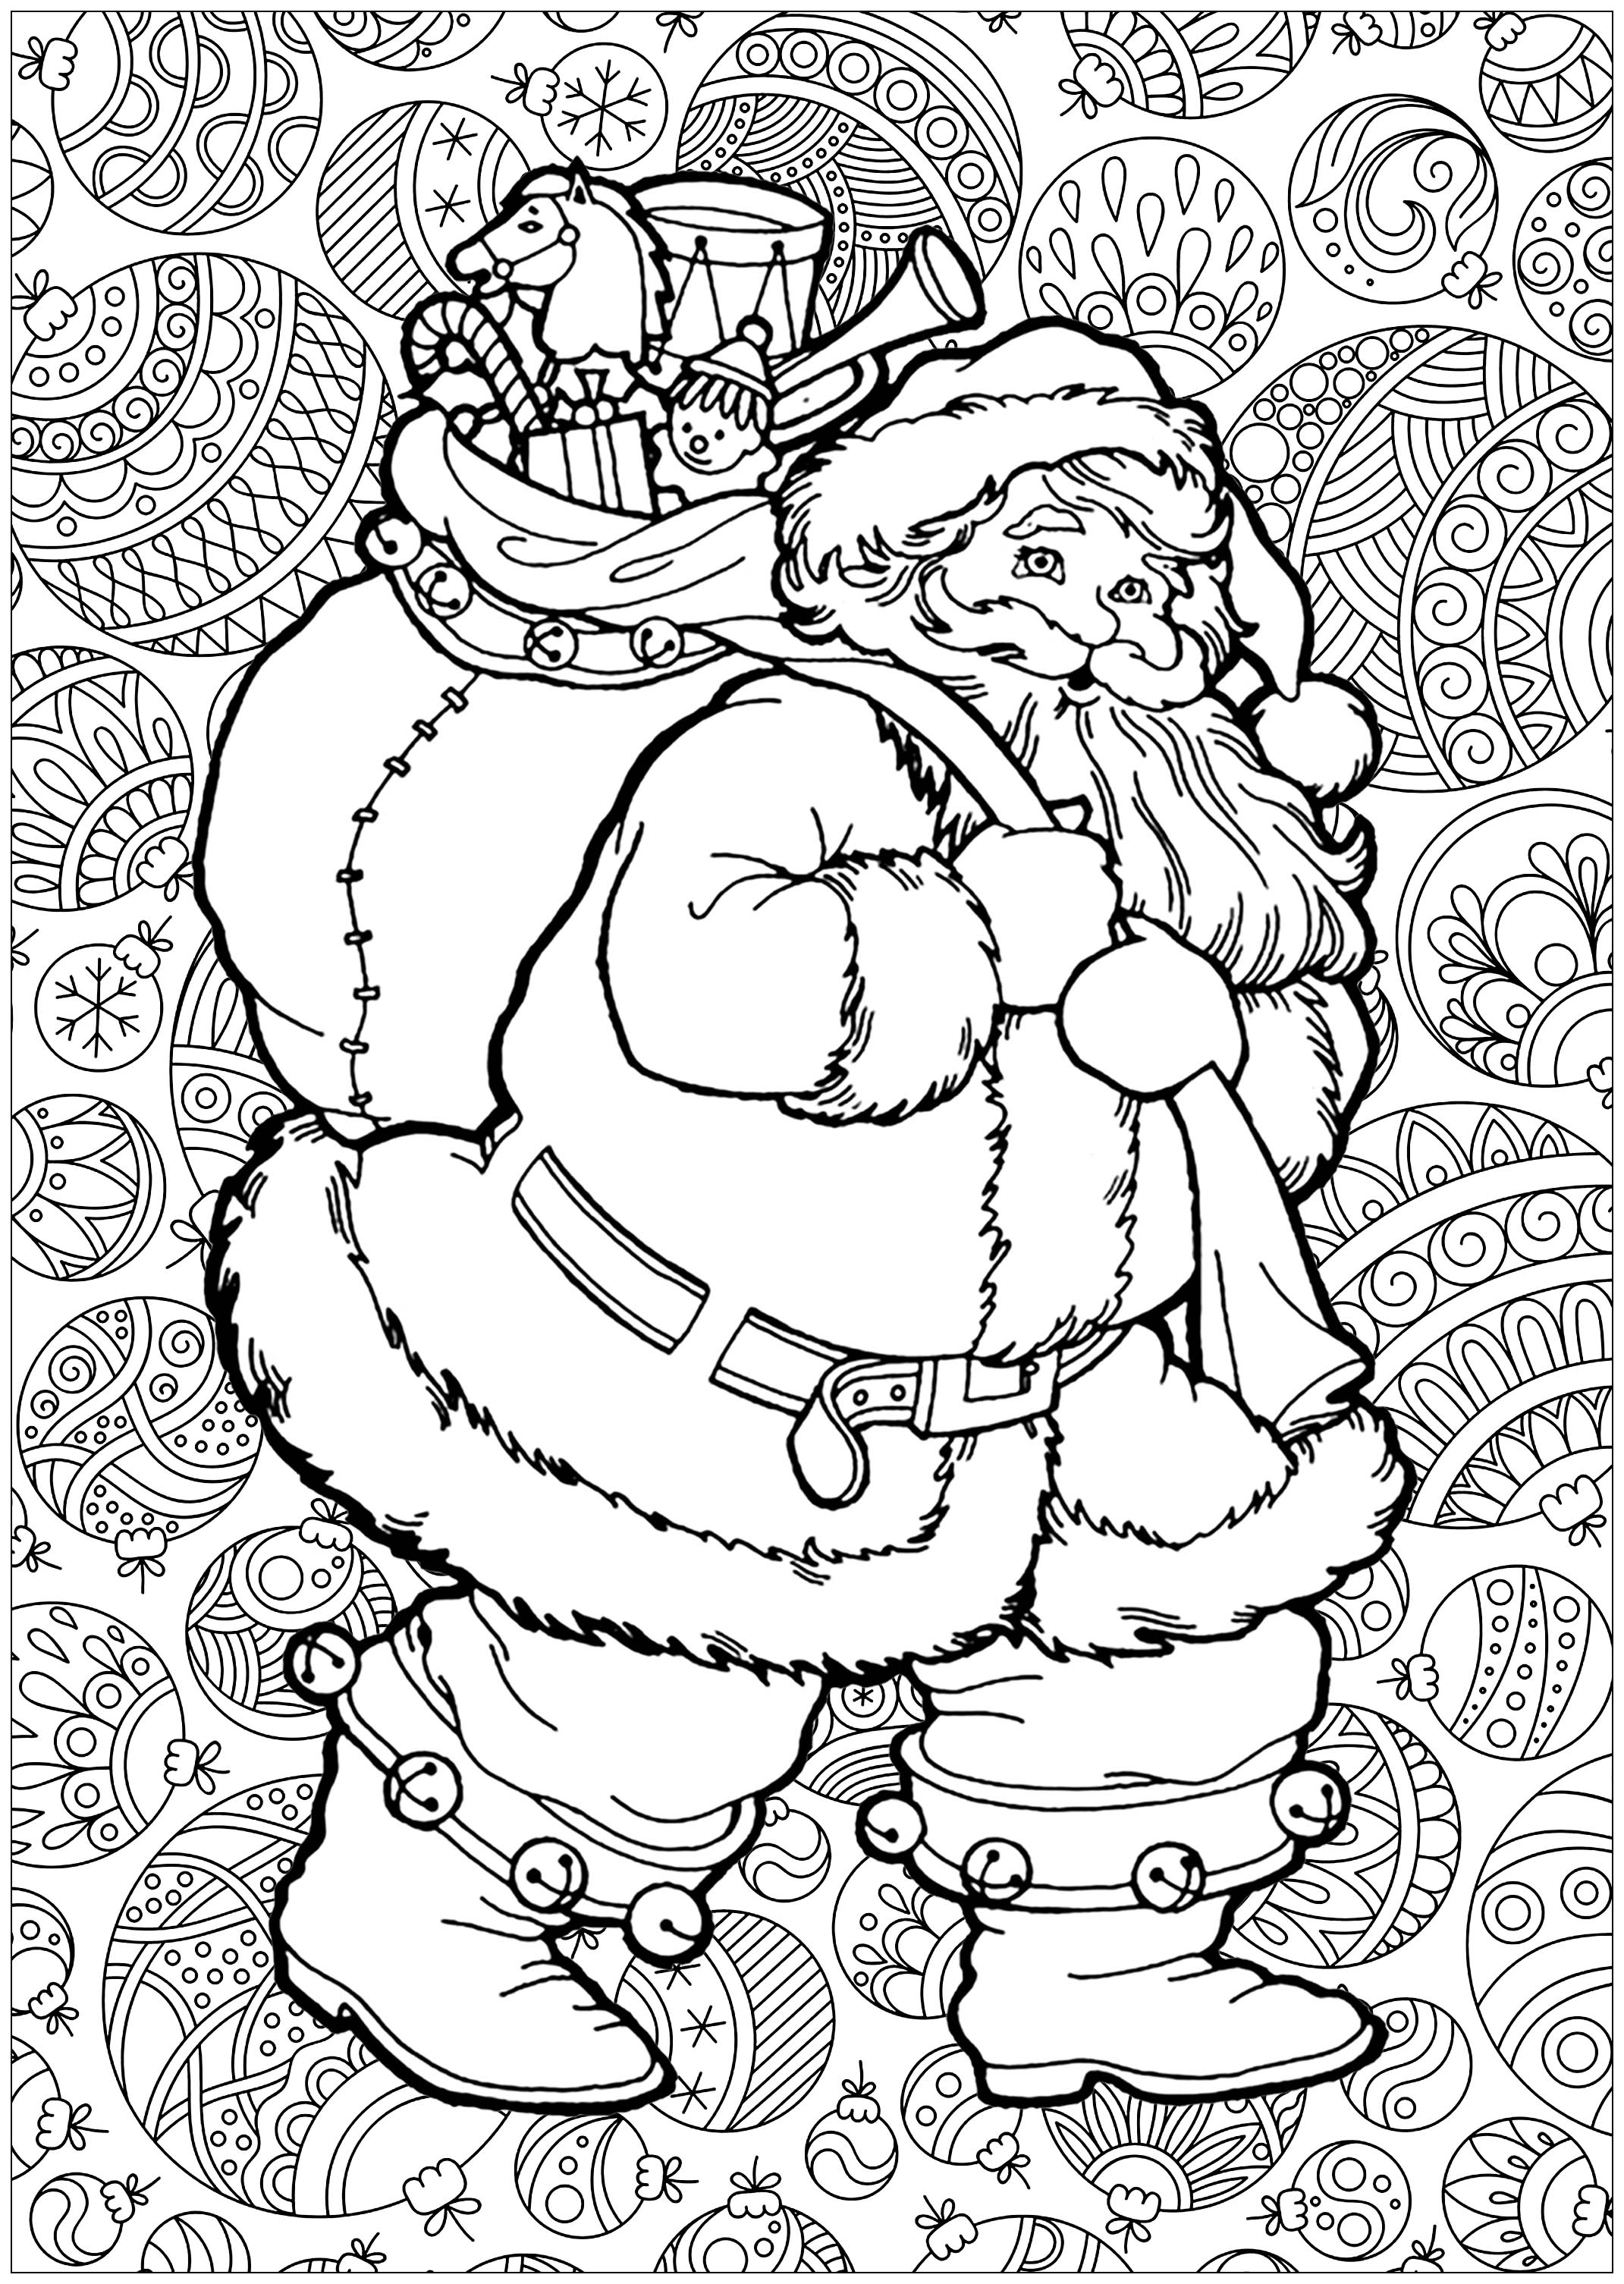 Download Santa claus with background - Christmas Adult Coloring Pages